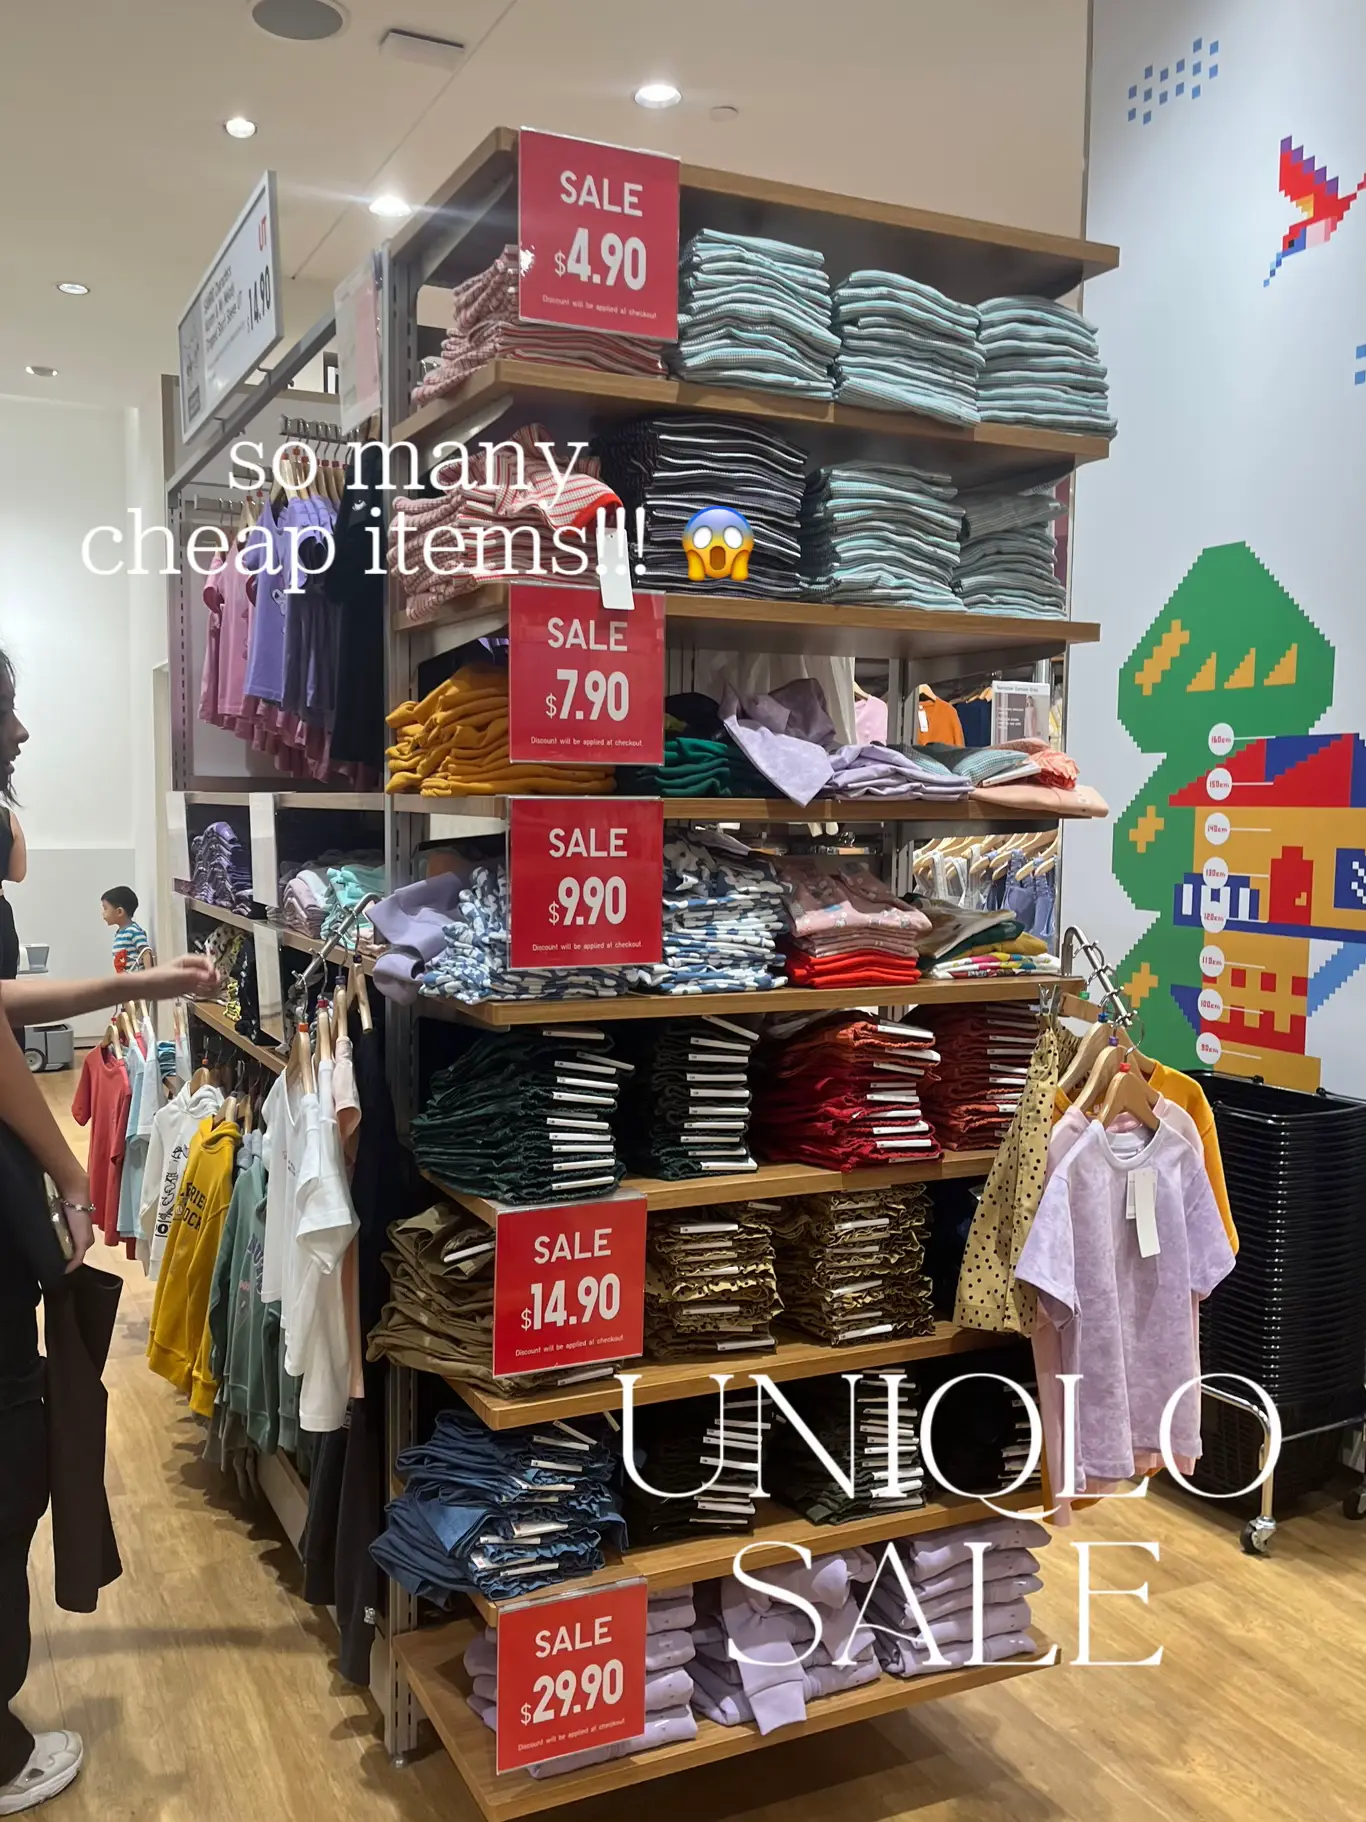 CHIONG to UNIQLO now 🏃‍♀️🏃‍♂️💨, Gallery posted by Veron